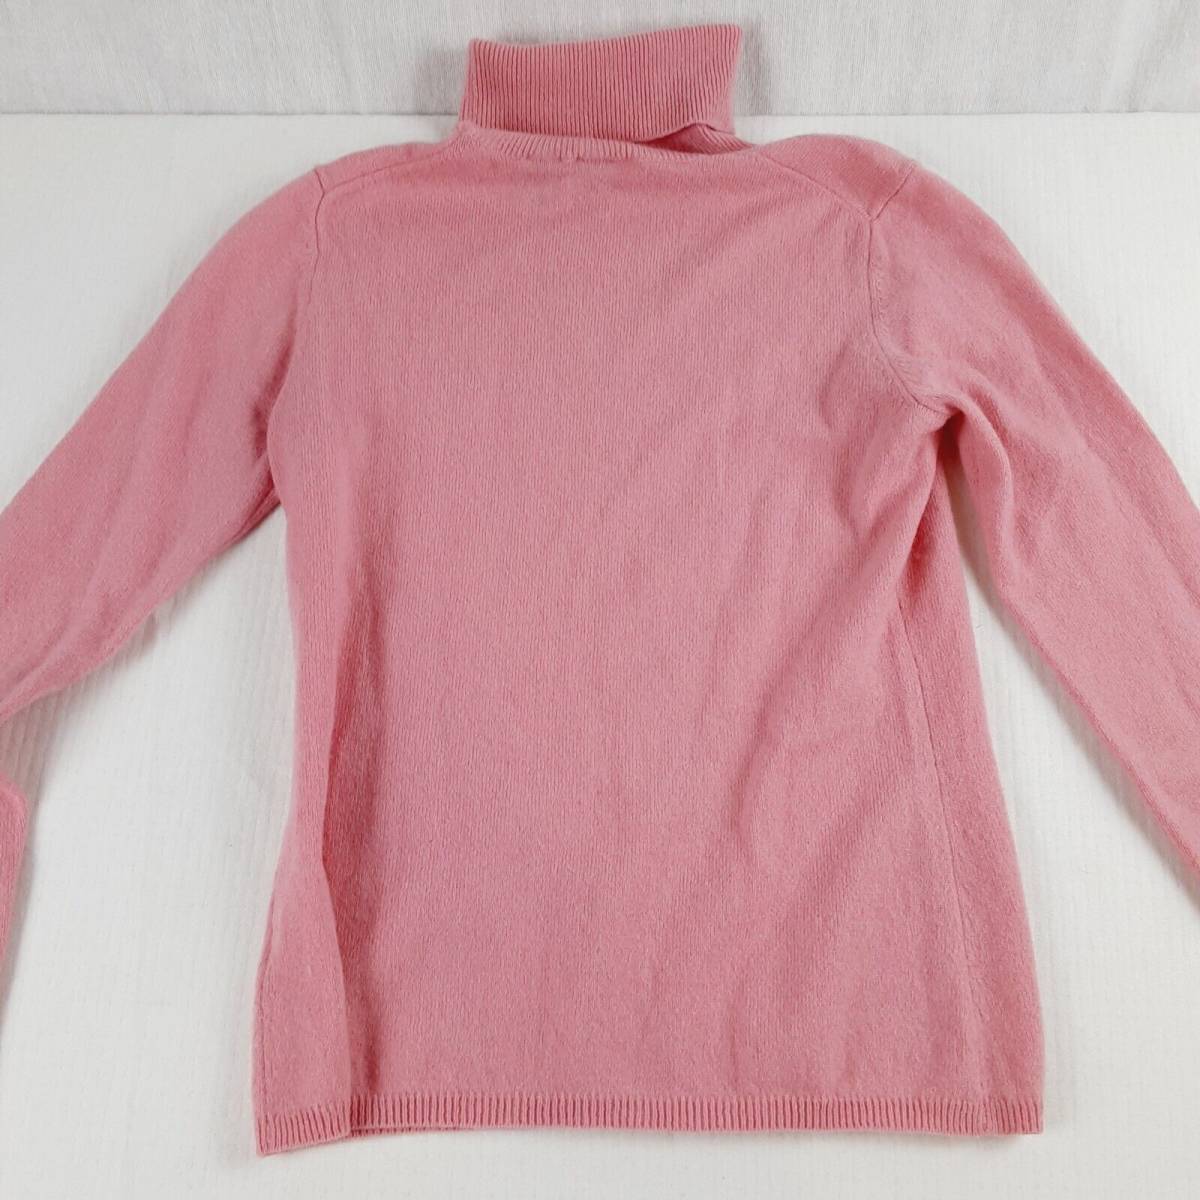 Saks Fifth Avenue Womens Small Pink Cashmere Turtleneck Sweater Shirt 海外 即決